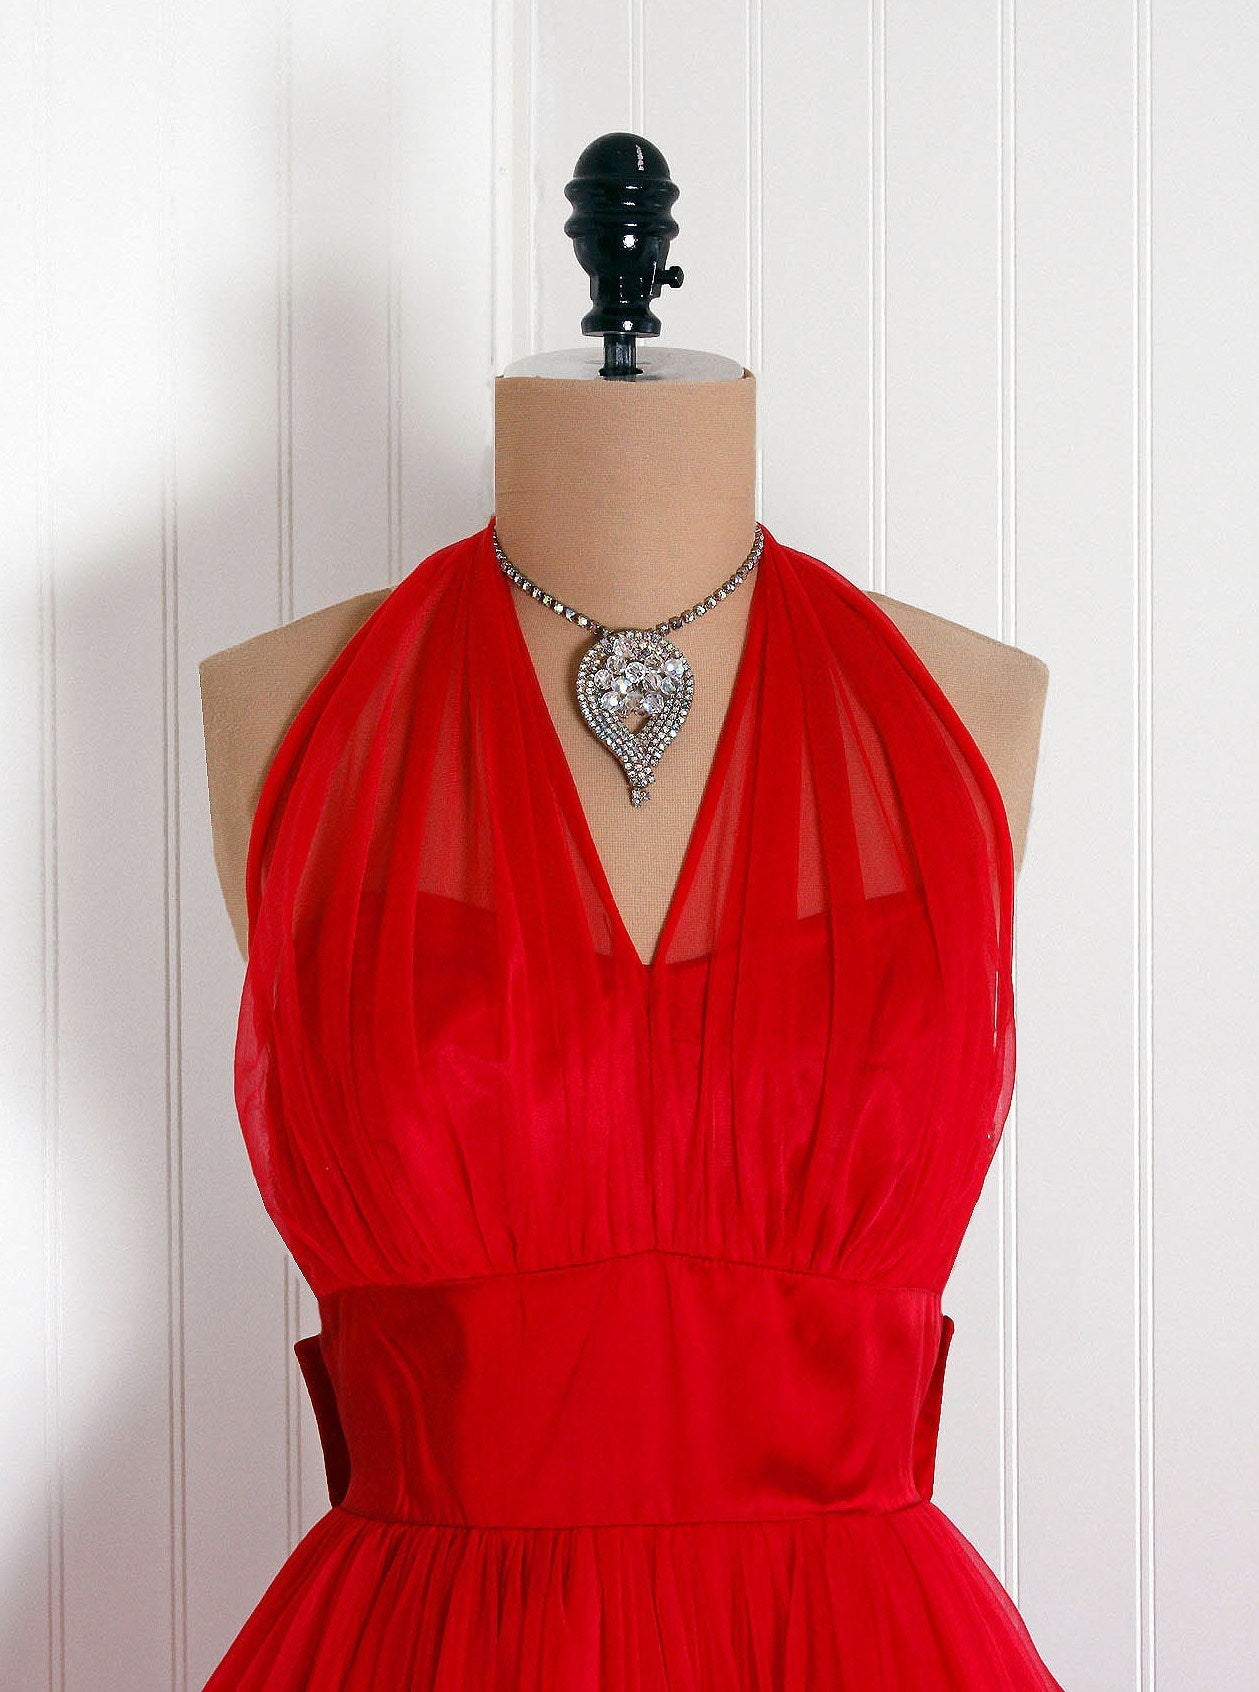 This is one of the most alluring and flattering 1950's party dress I have ever seen! Fashioned from ruby-red chiffon and satin, this creation has everything a woman wants. The bodice is a beautiful sweetheart illusion, low-cut plunge halter. I adore